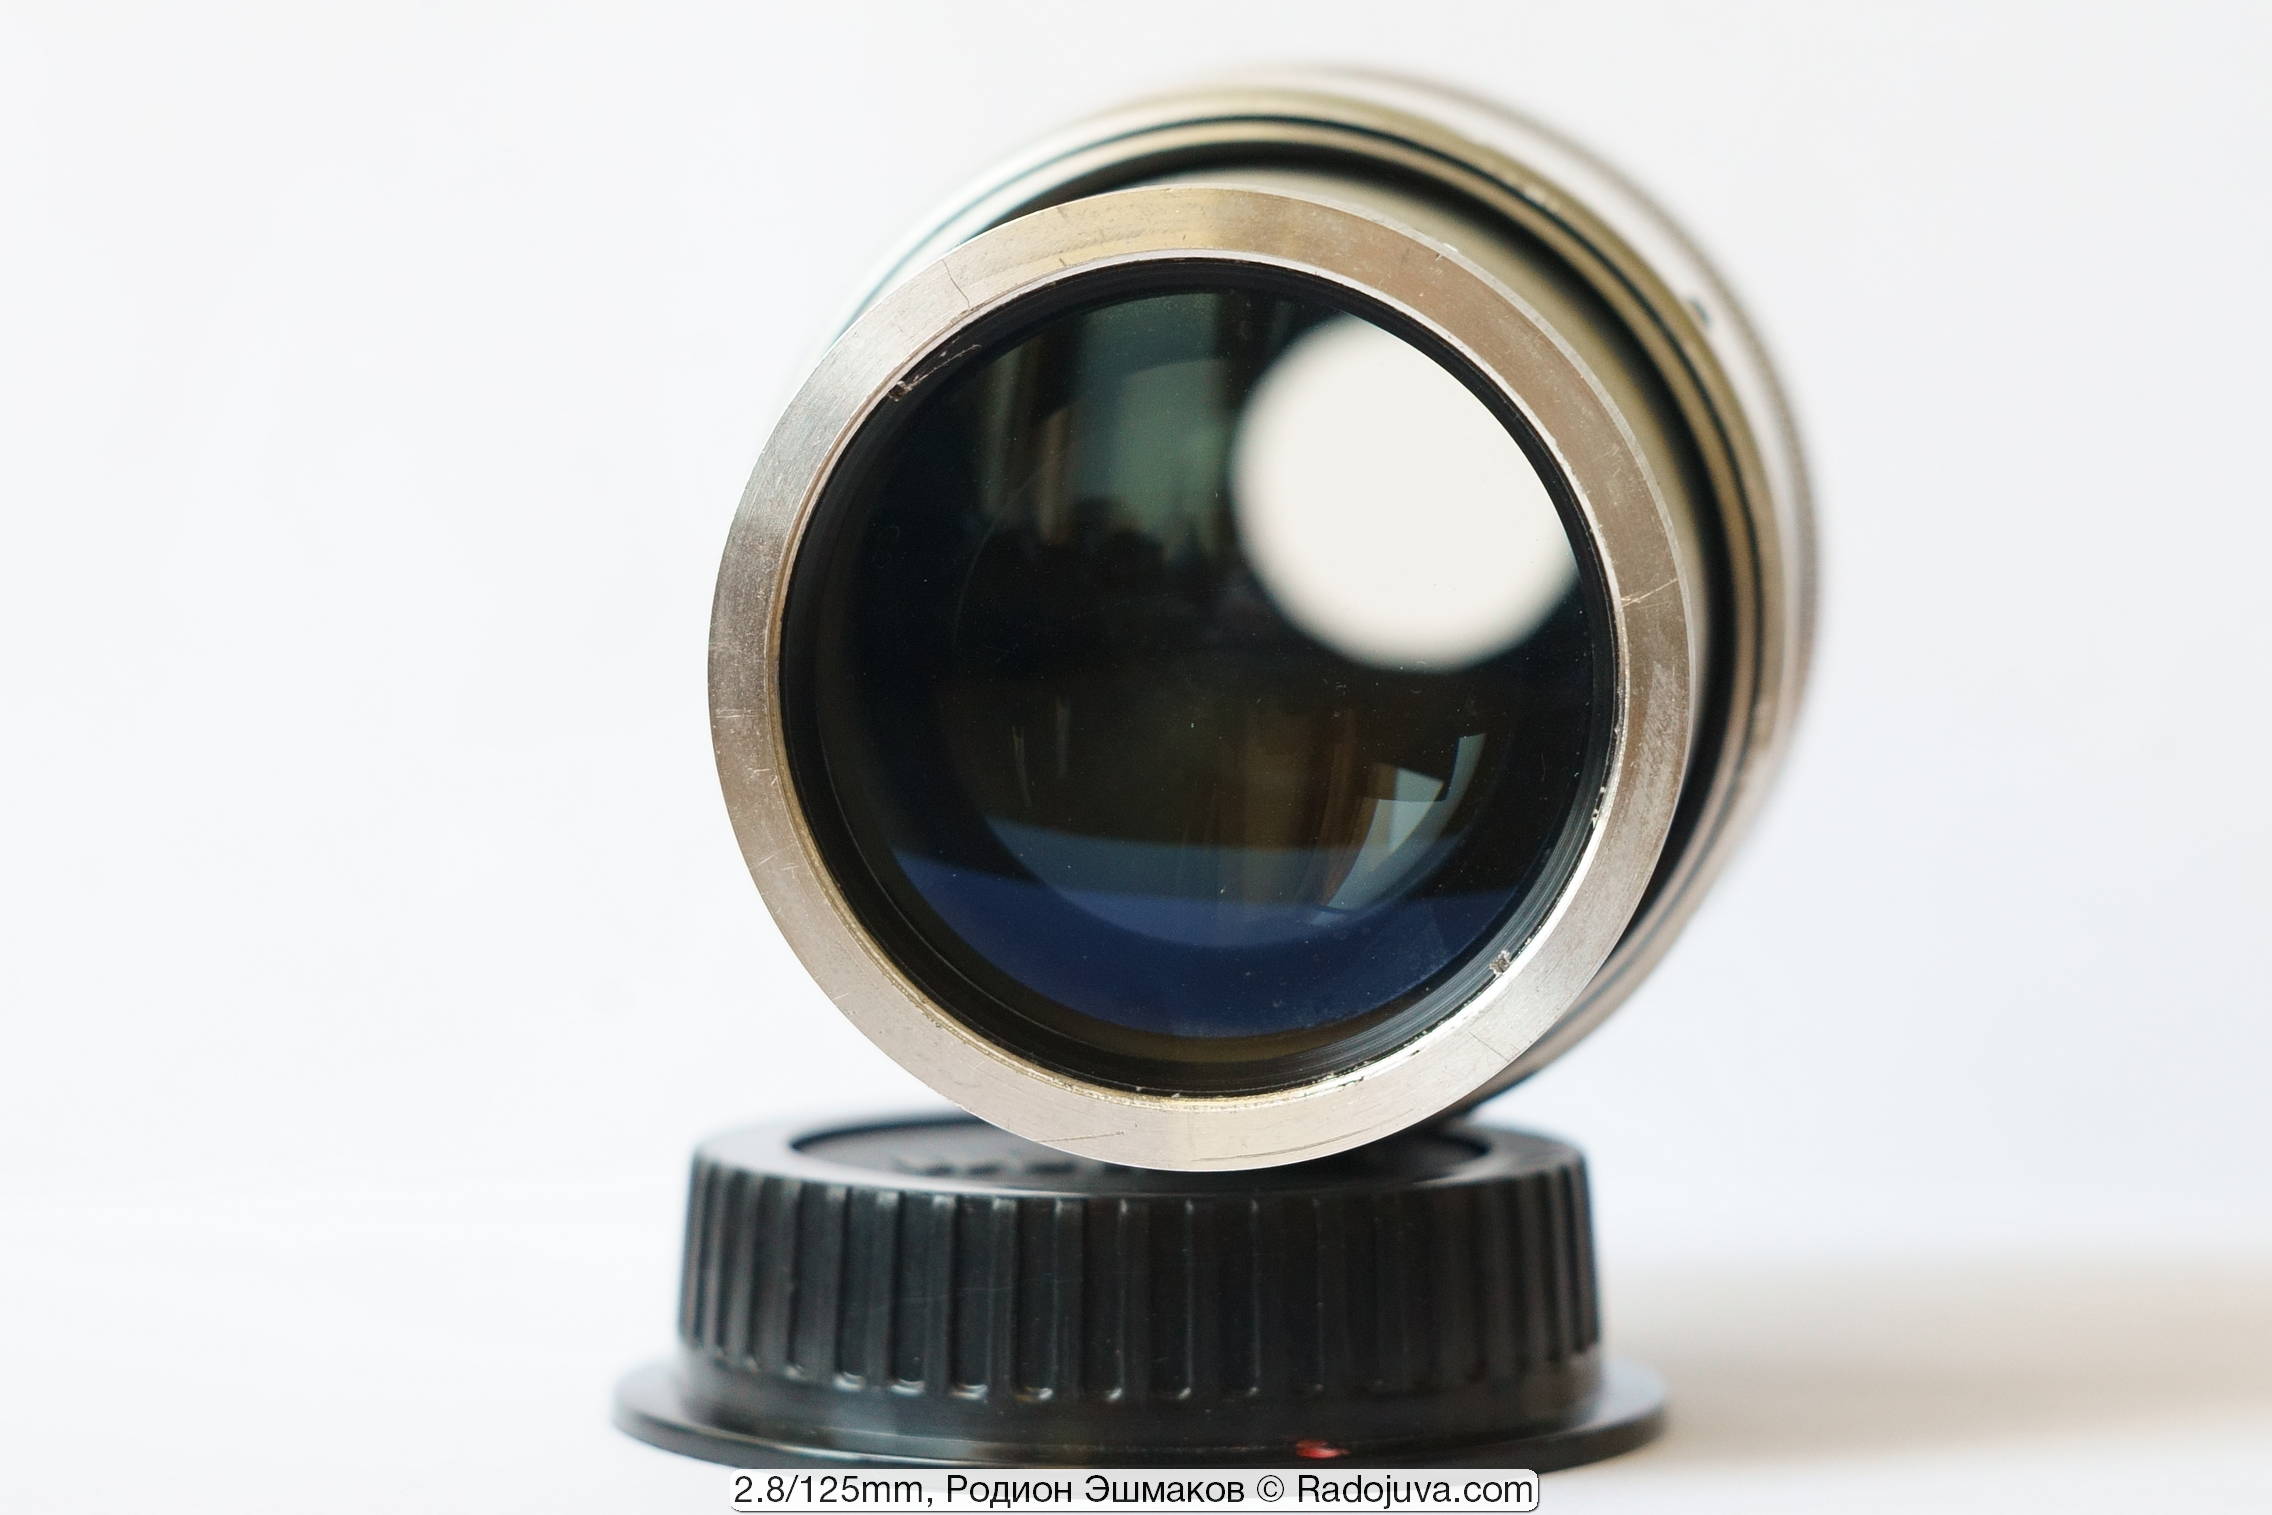 The multi-blade diaphragm always leaves the pupil of the lens round.